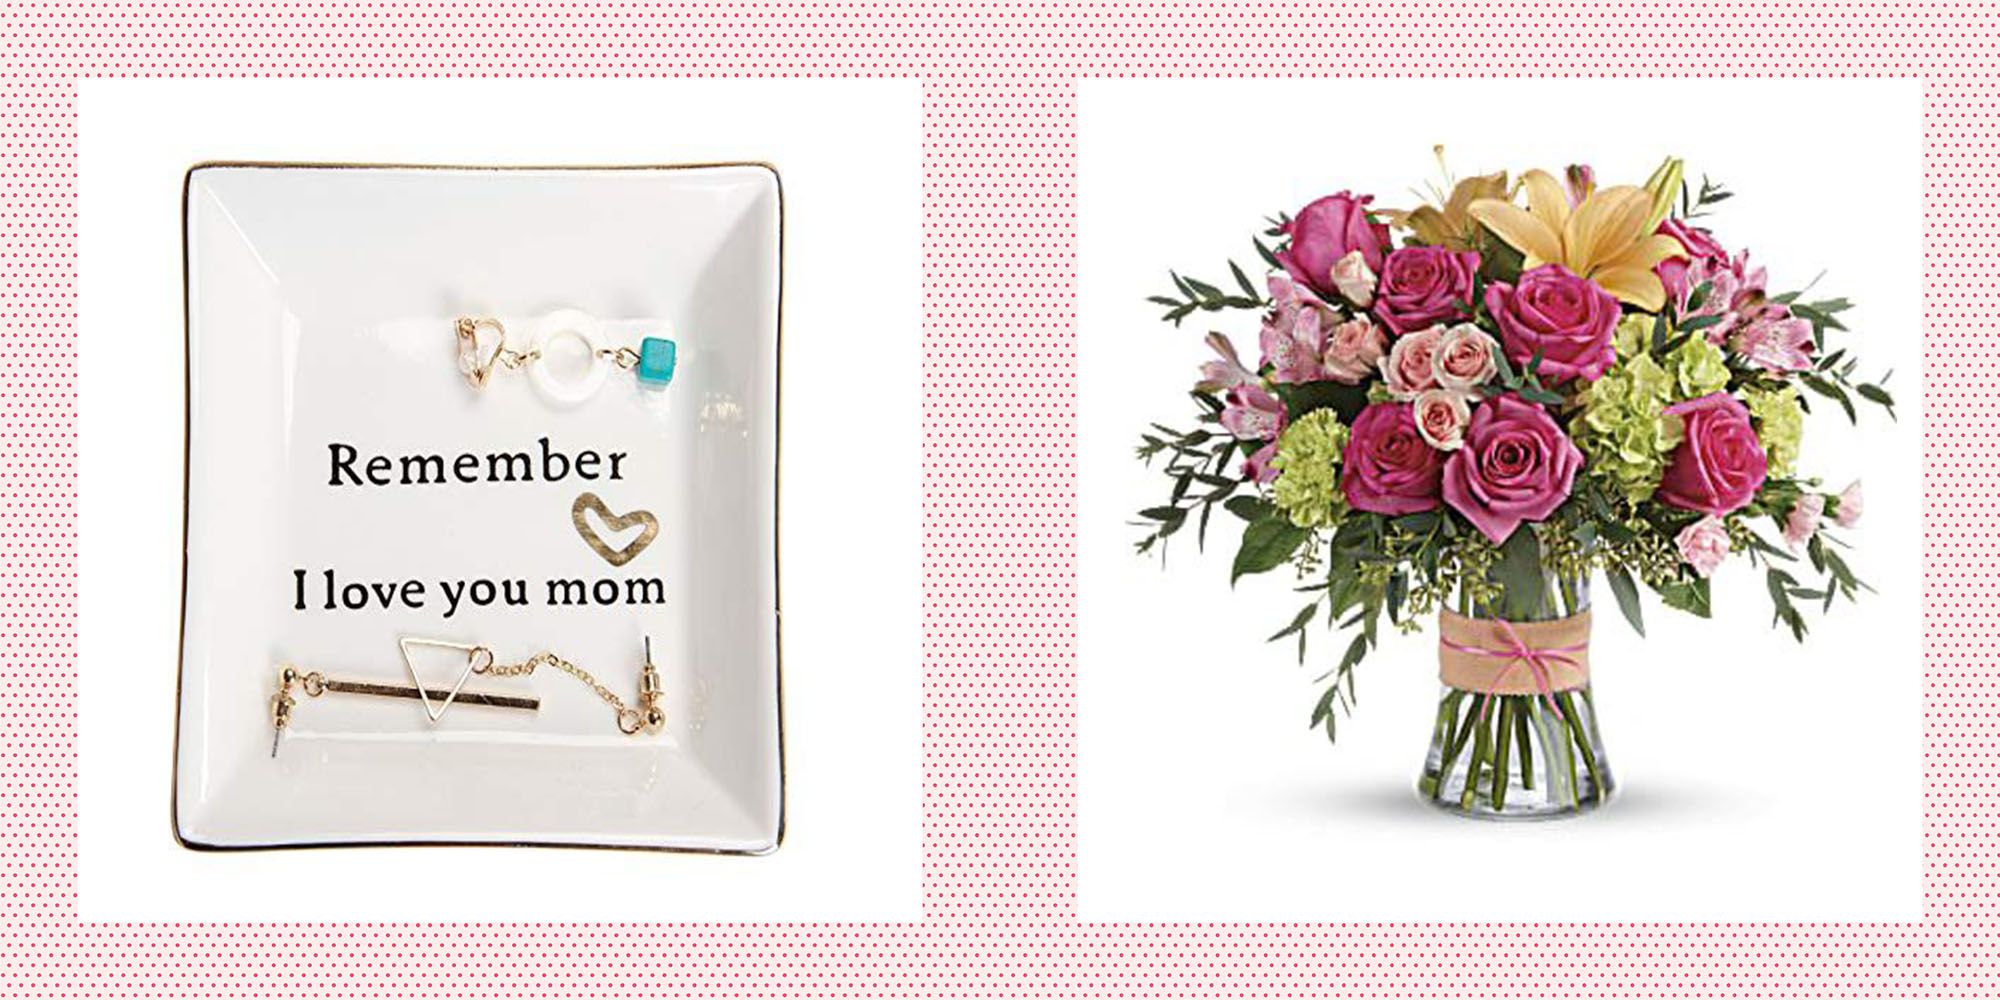 Inexpensive Mother's Day Gifts for a Crowd - An Alli Event